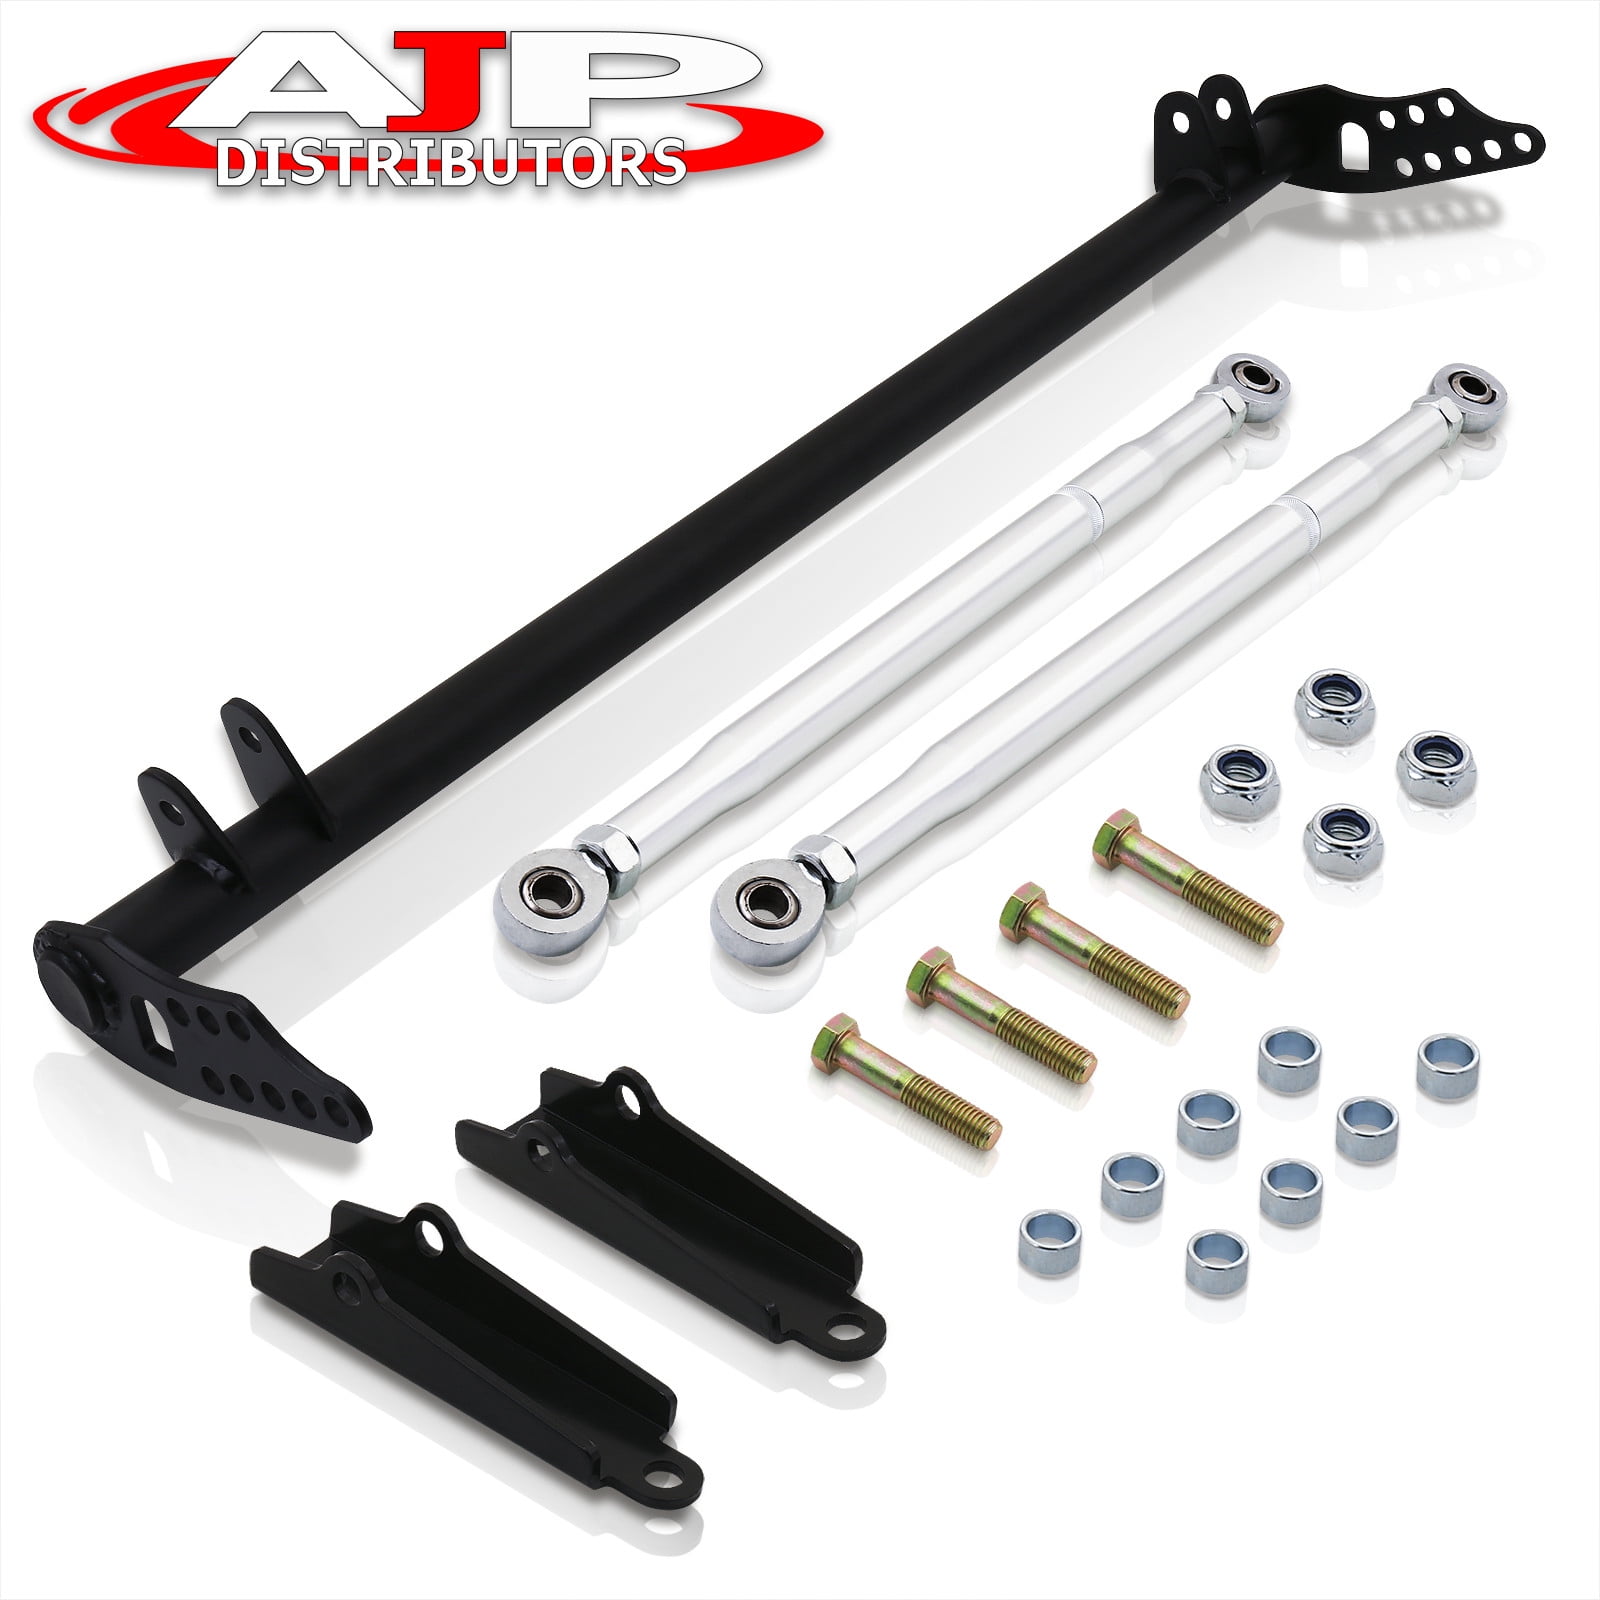 AJP Distributors Replacement Upgrade Performance Front Suspension Stability Traction Control Arm Lower Tie Bar Brace Kit For Civic Integra 1992 1993 1994 1995 1996 1997 1998 1999 2000 2001